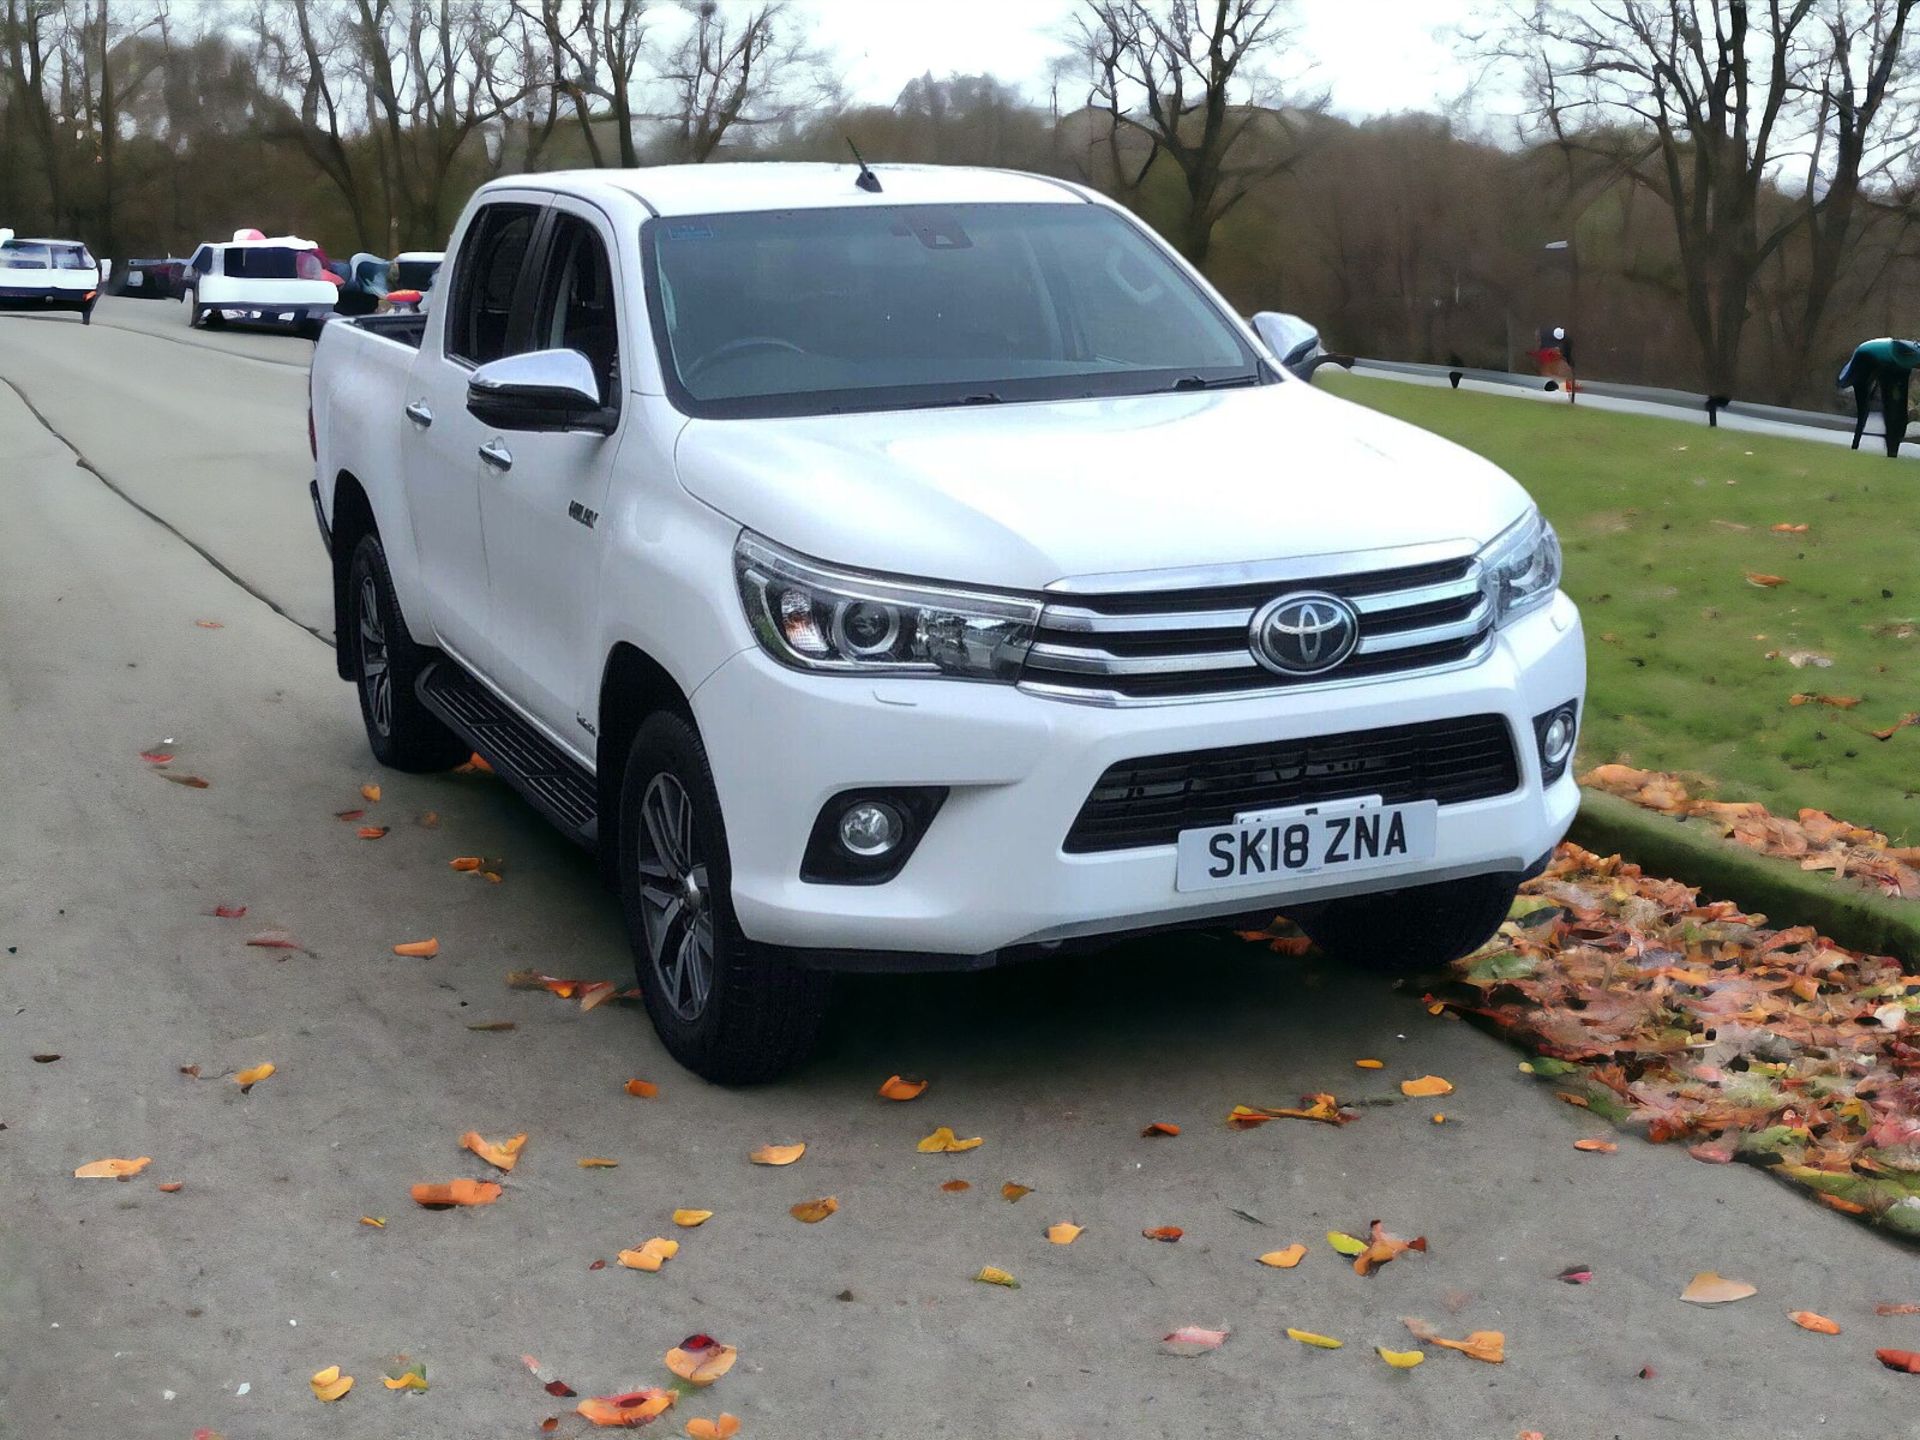 2018/18 TOYOTA HILUX 2.4 INVINCIBLE DOUBLE CAB OFF-ROAD VEHICLE >>--NO VAT ON HAMMER--<<